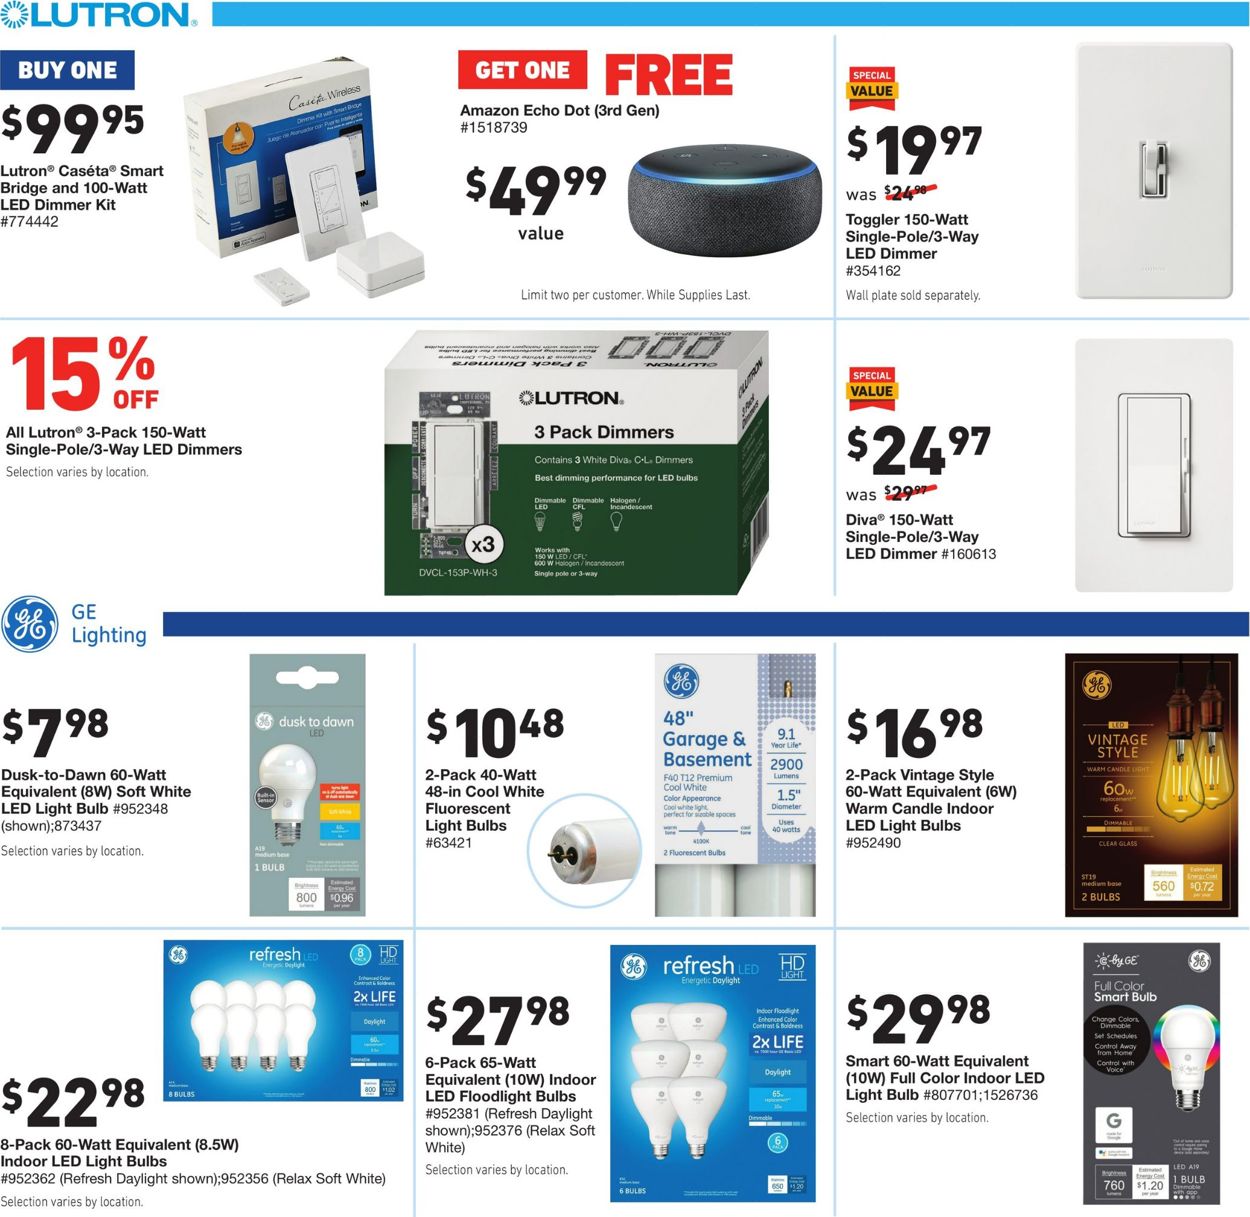 Lowe's - New Year's Ad 2019/2020 Weekly Ad Circular - valid 12/25-01/01/2020 (Page 6)